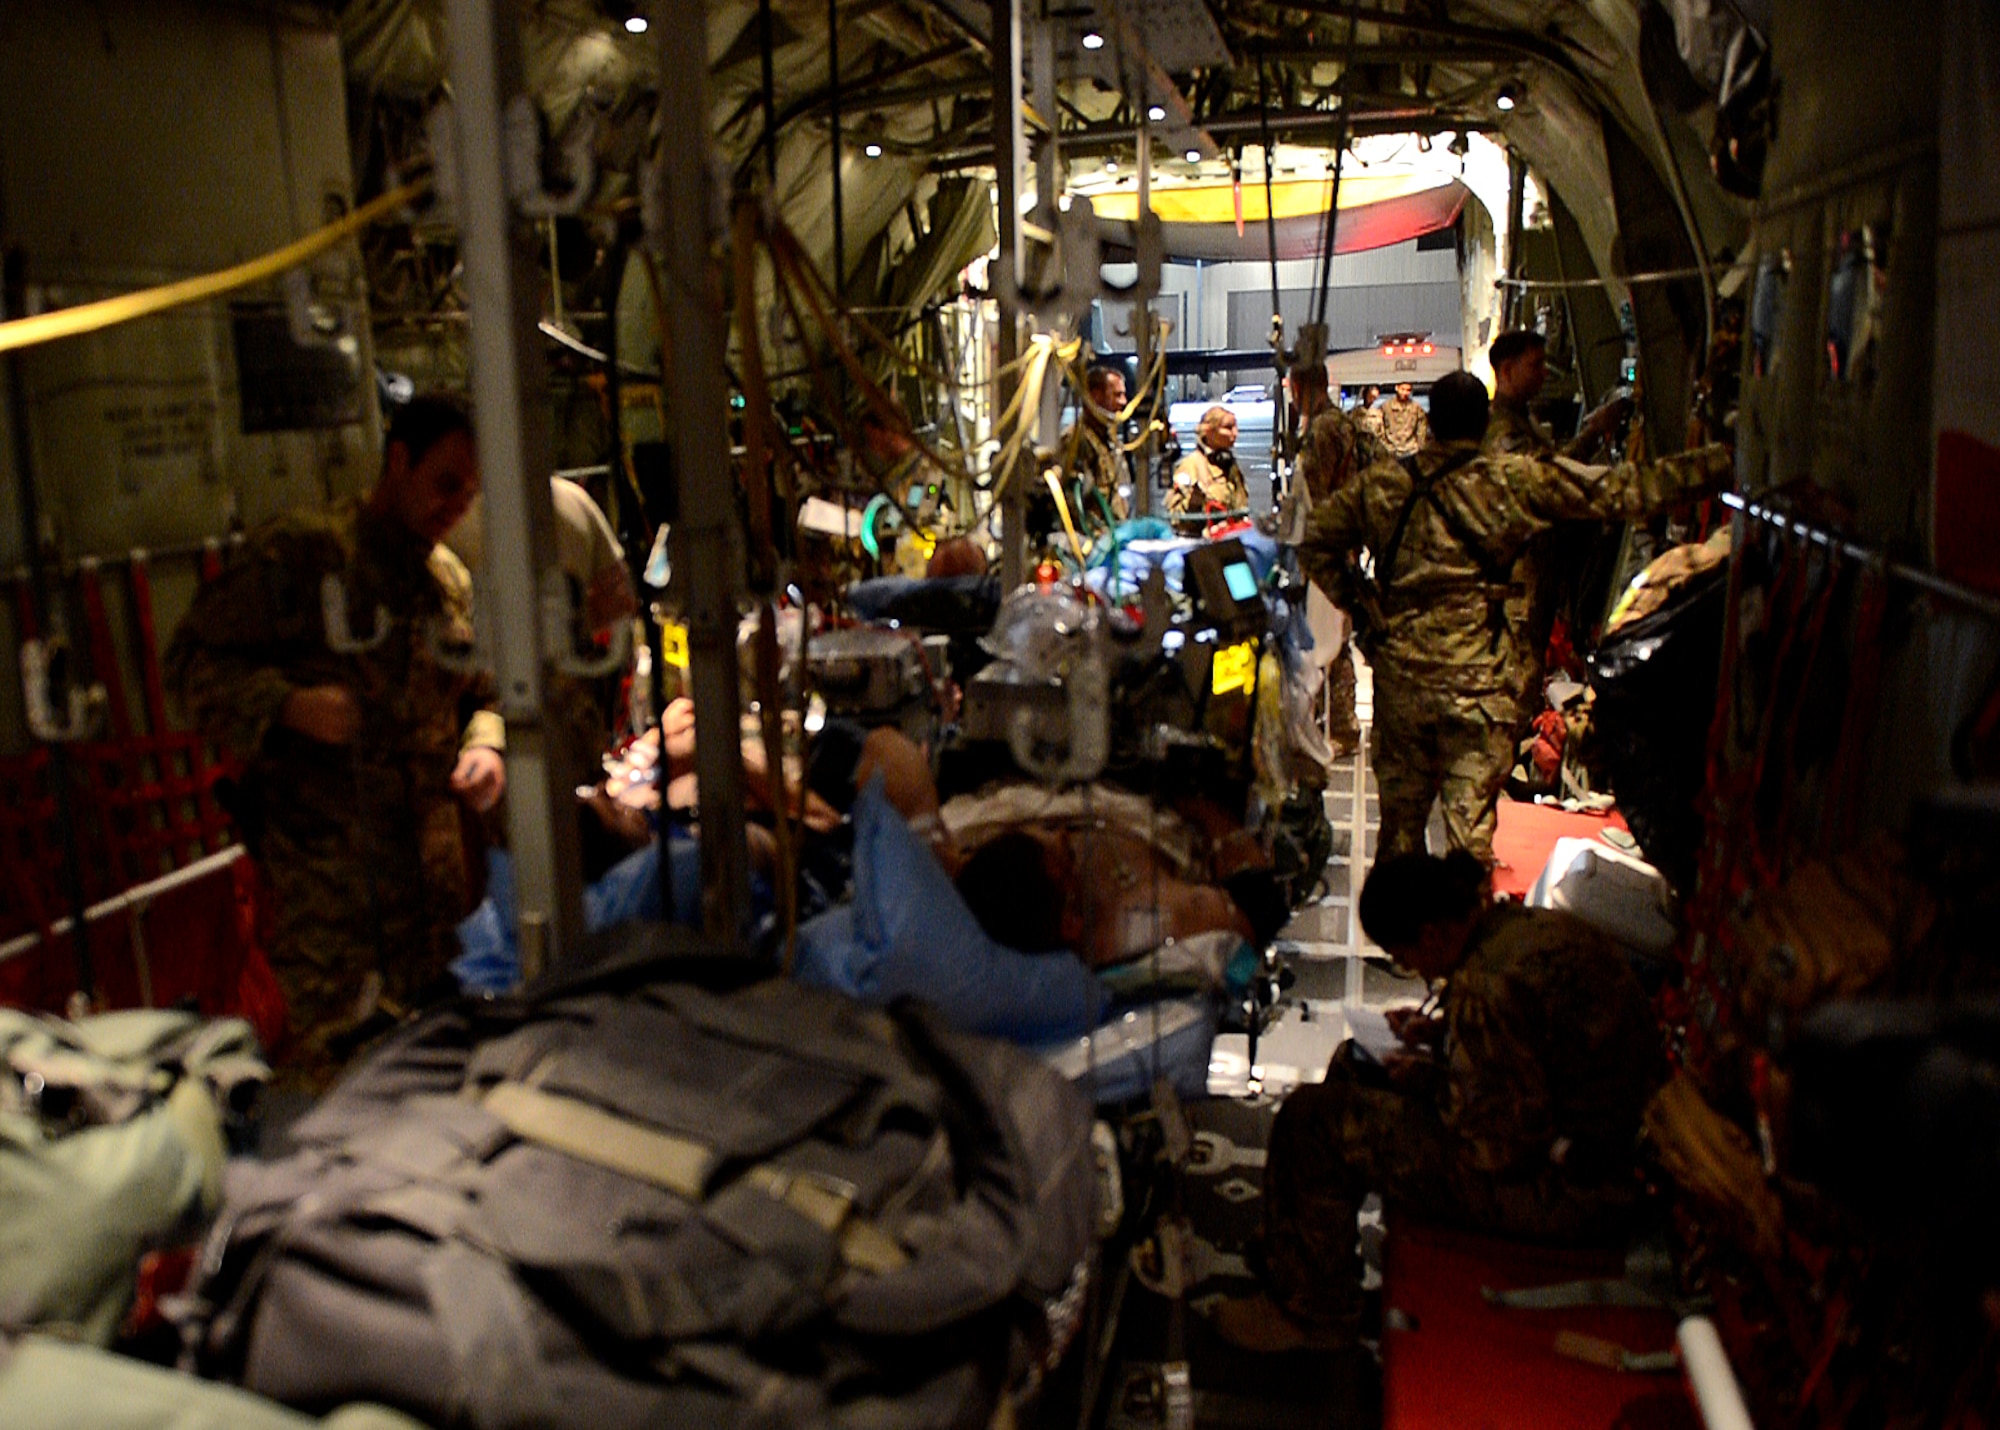 U.S. Air Force Airmen from the 455th Expeditionary Aeromedical Evacuation Squadron prepare to unload patients at Bagram Airfield, Afghanistan May 29, 2014.  The Aeromedical Evacuation squadron transports and treats ill and injured personnel throughout Afghanistan. The unit uses fixed-wing aircraft such as the C-130J Super Hercules, which allows larger patient loads, long-distance transportation and a greater ability to care for injured members. (U.S. Air Force photo by Staff Sgt. Evelyn Chavez/Released)  